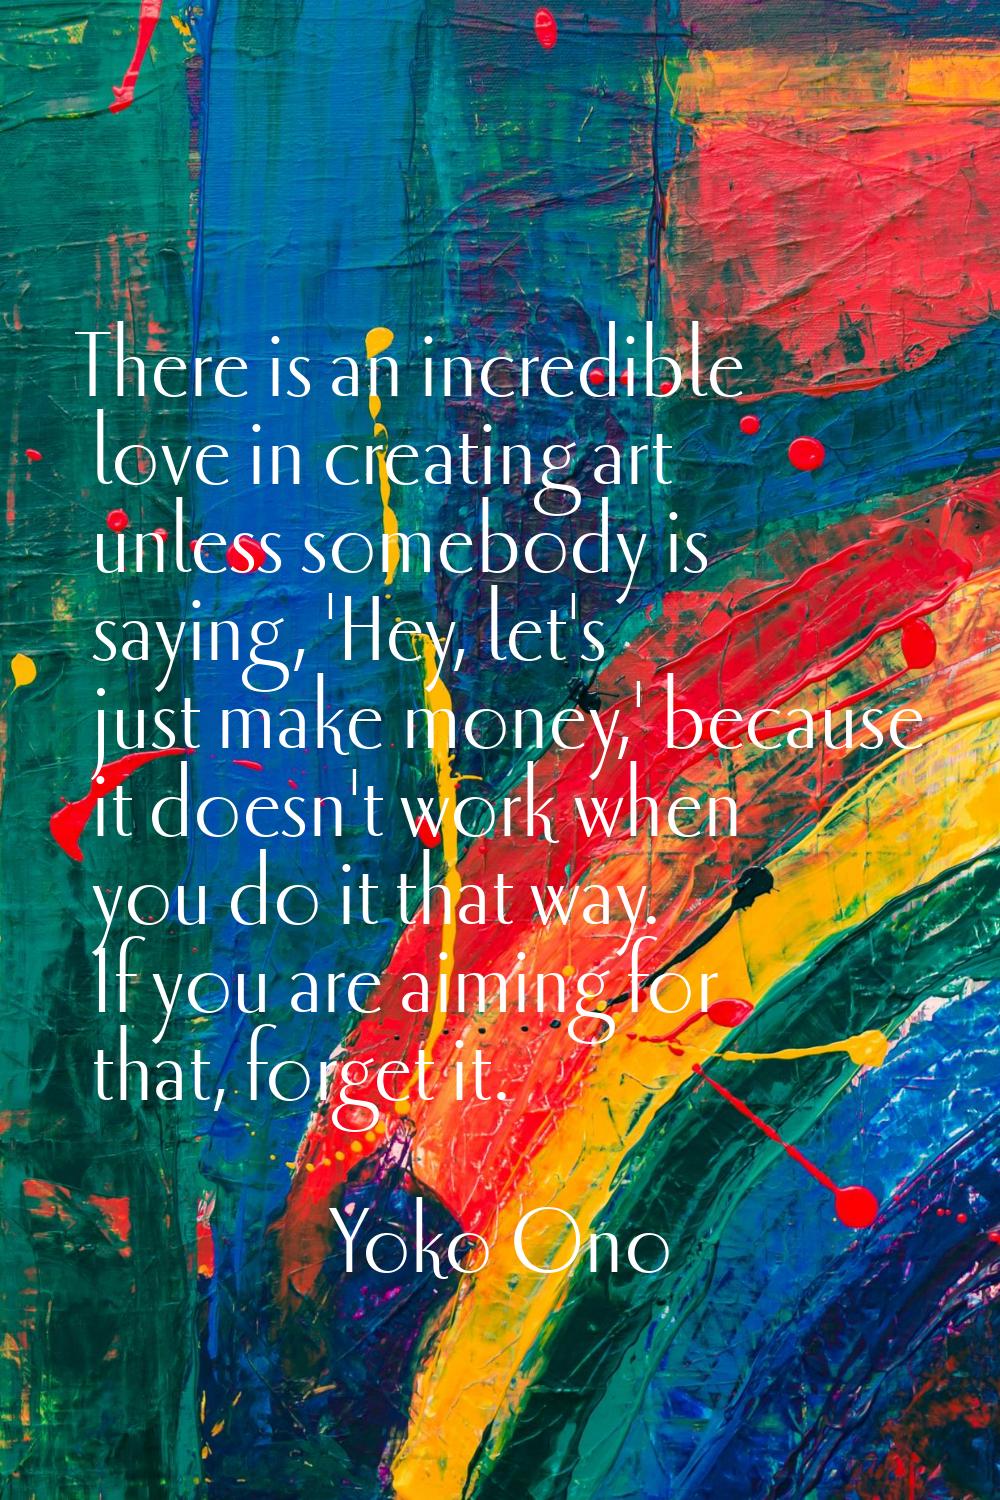 There is an incredible love in creating art unless somebody is saying, 'Hey, let's just make money,